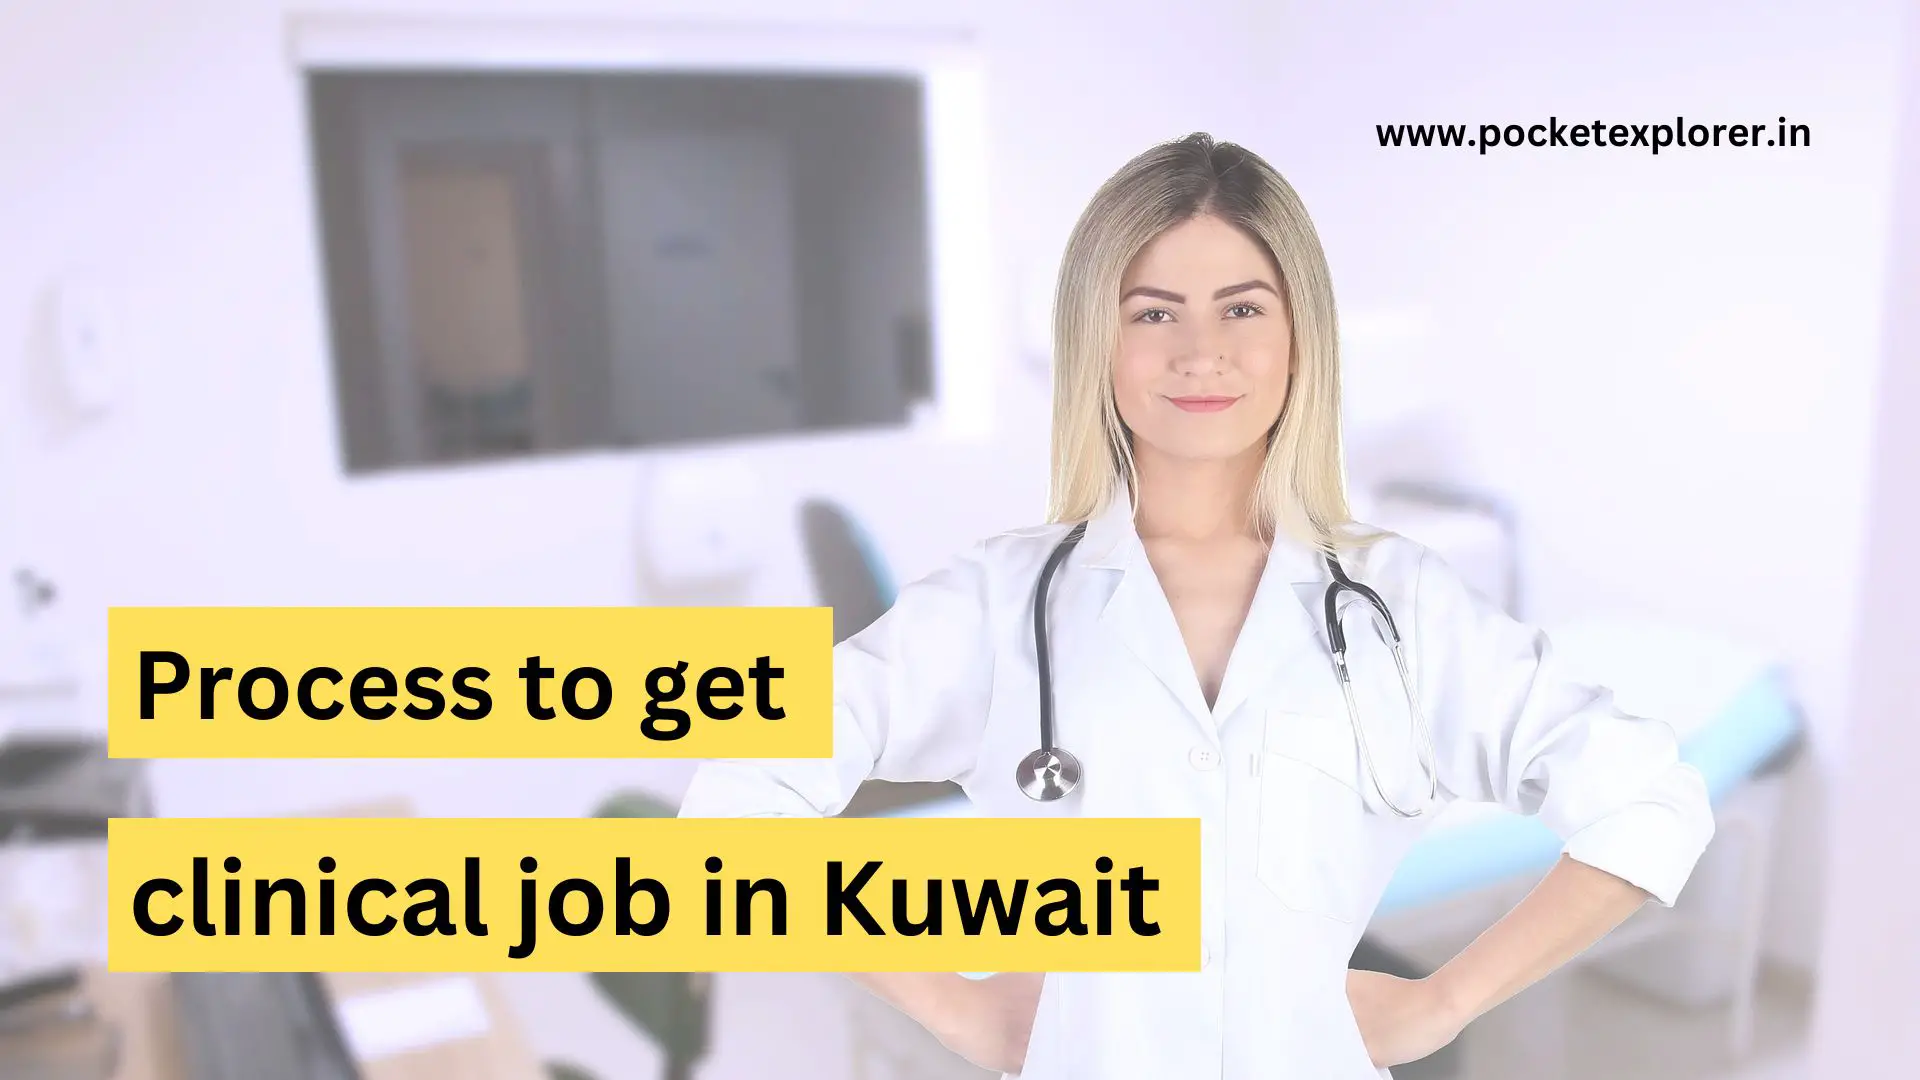 Process to get clinical job in Kuwait